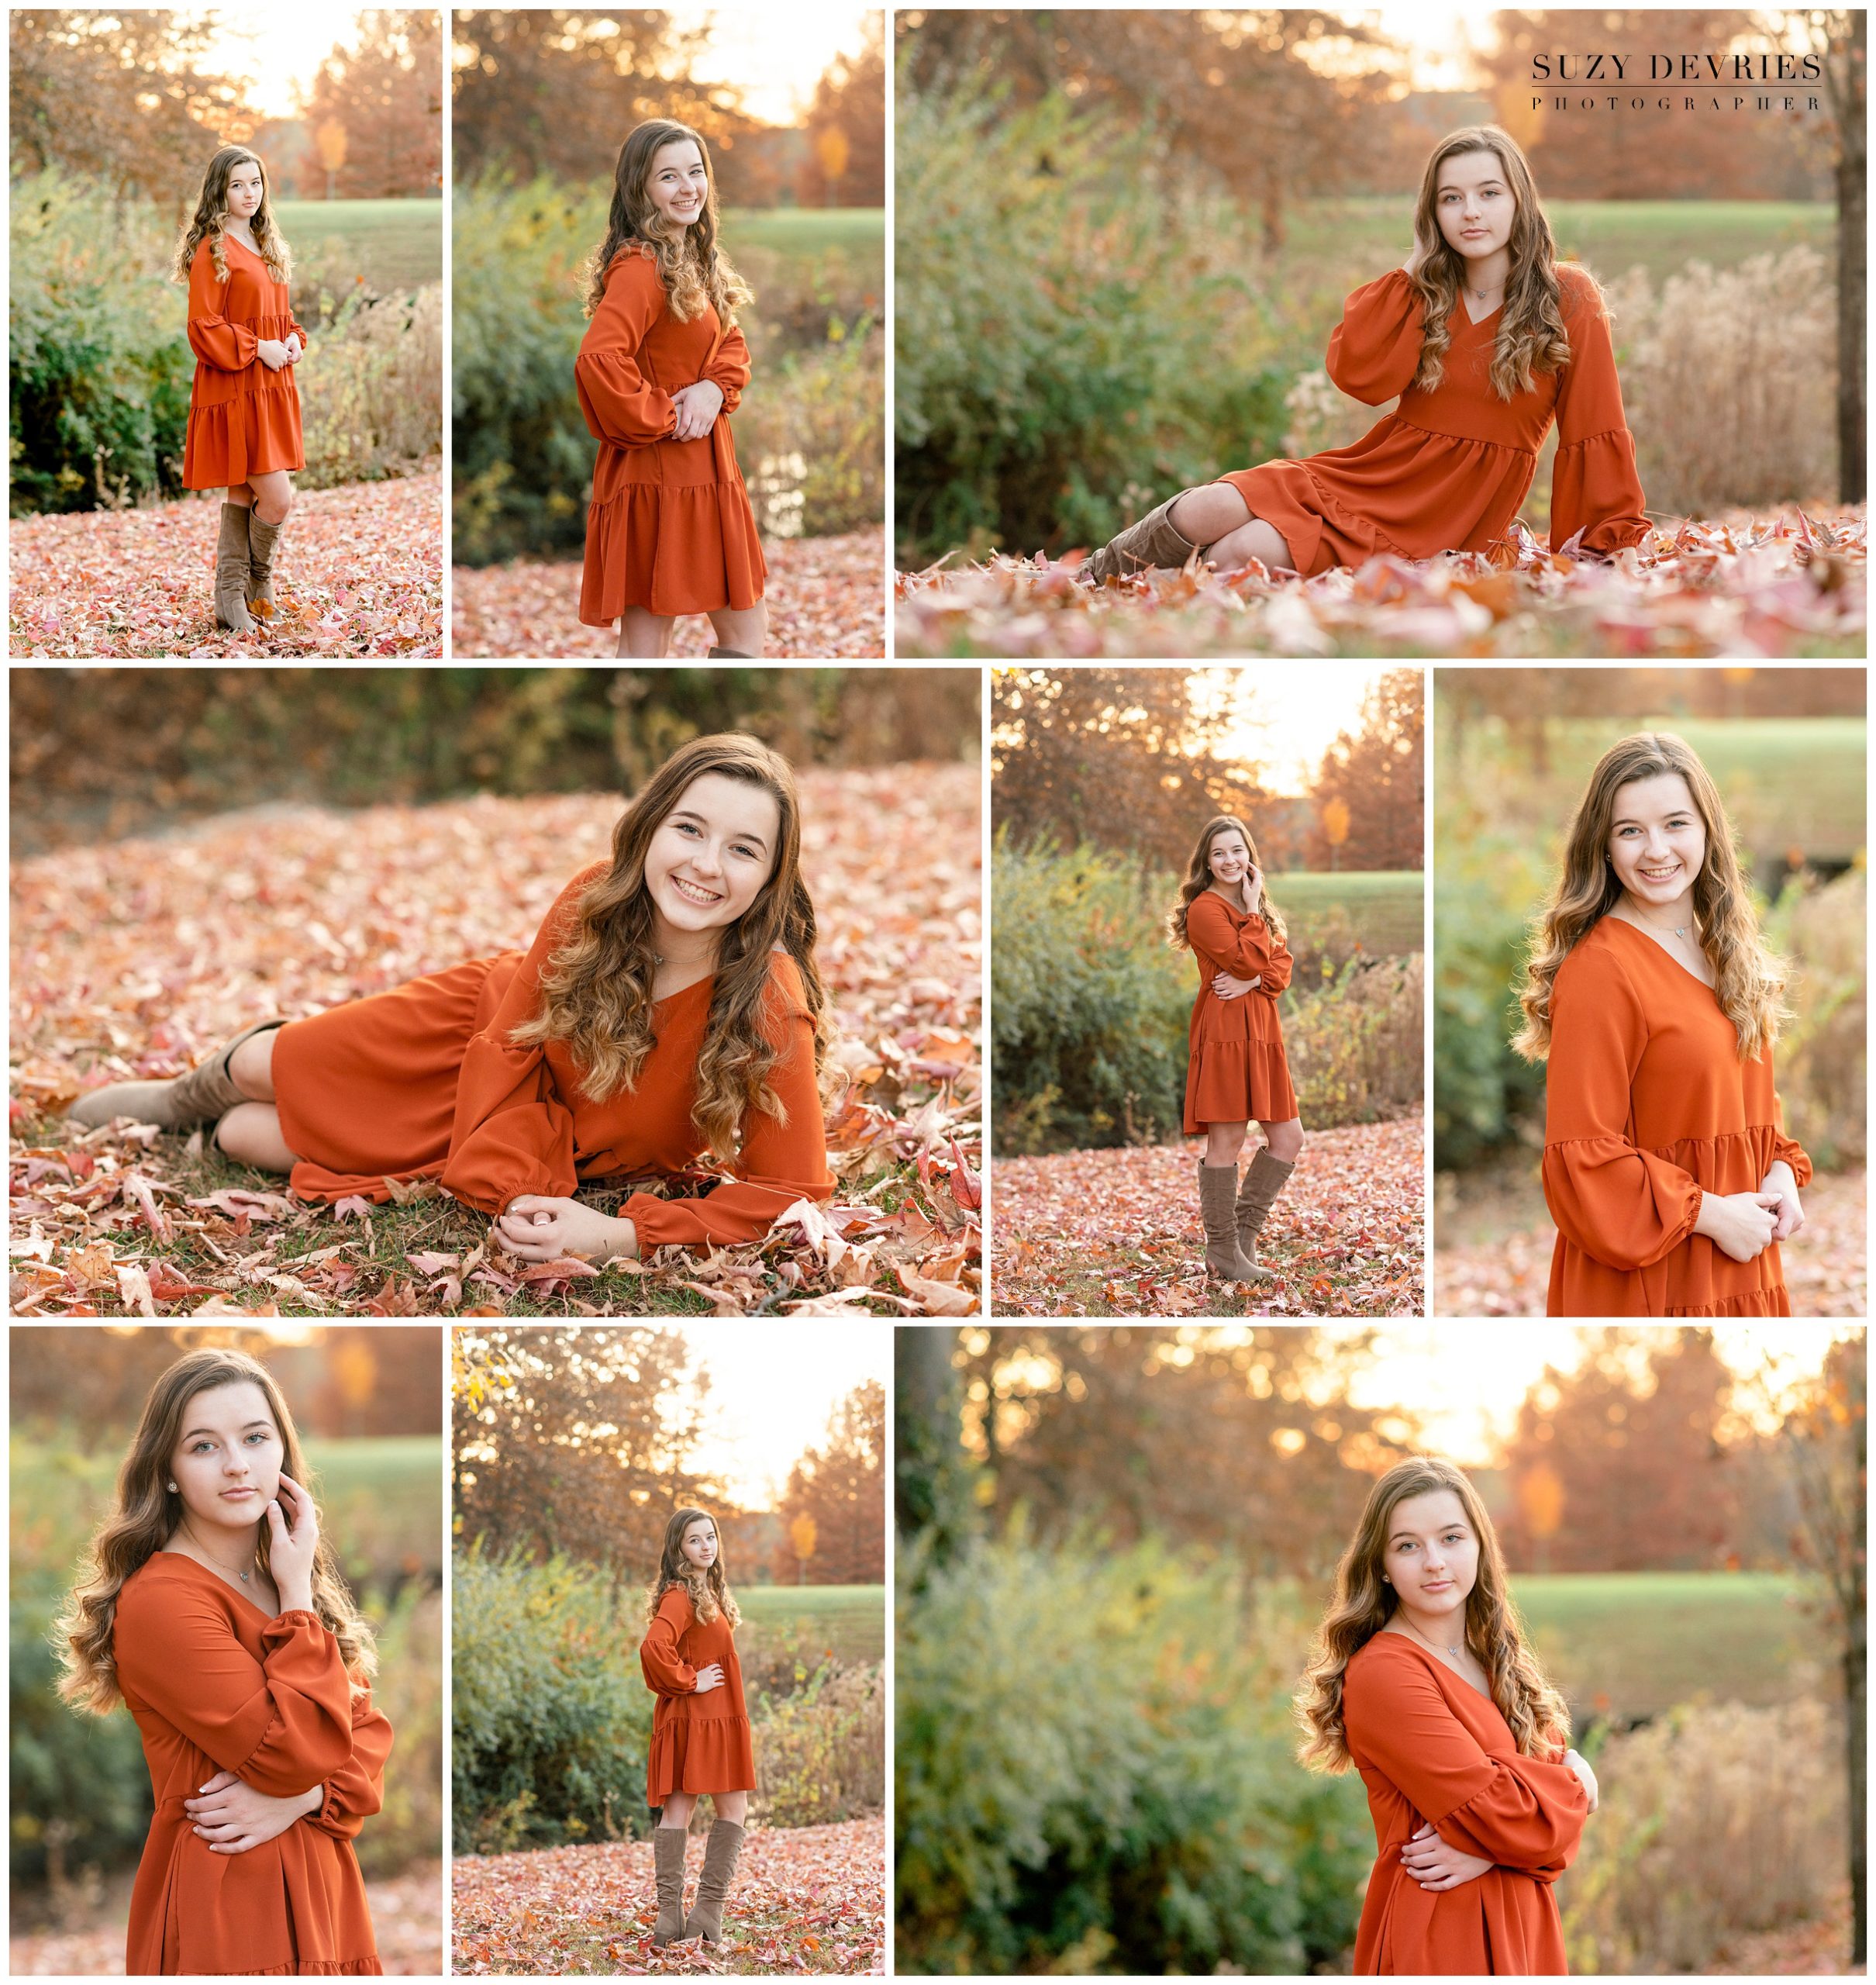 High school girl wearing an orange dress and tall tan boots posing in a field